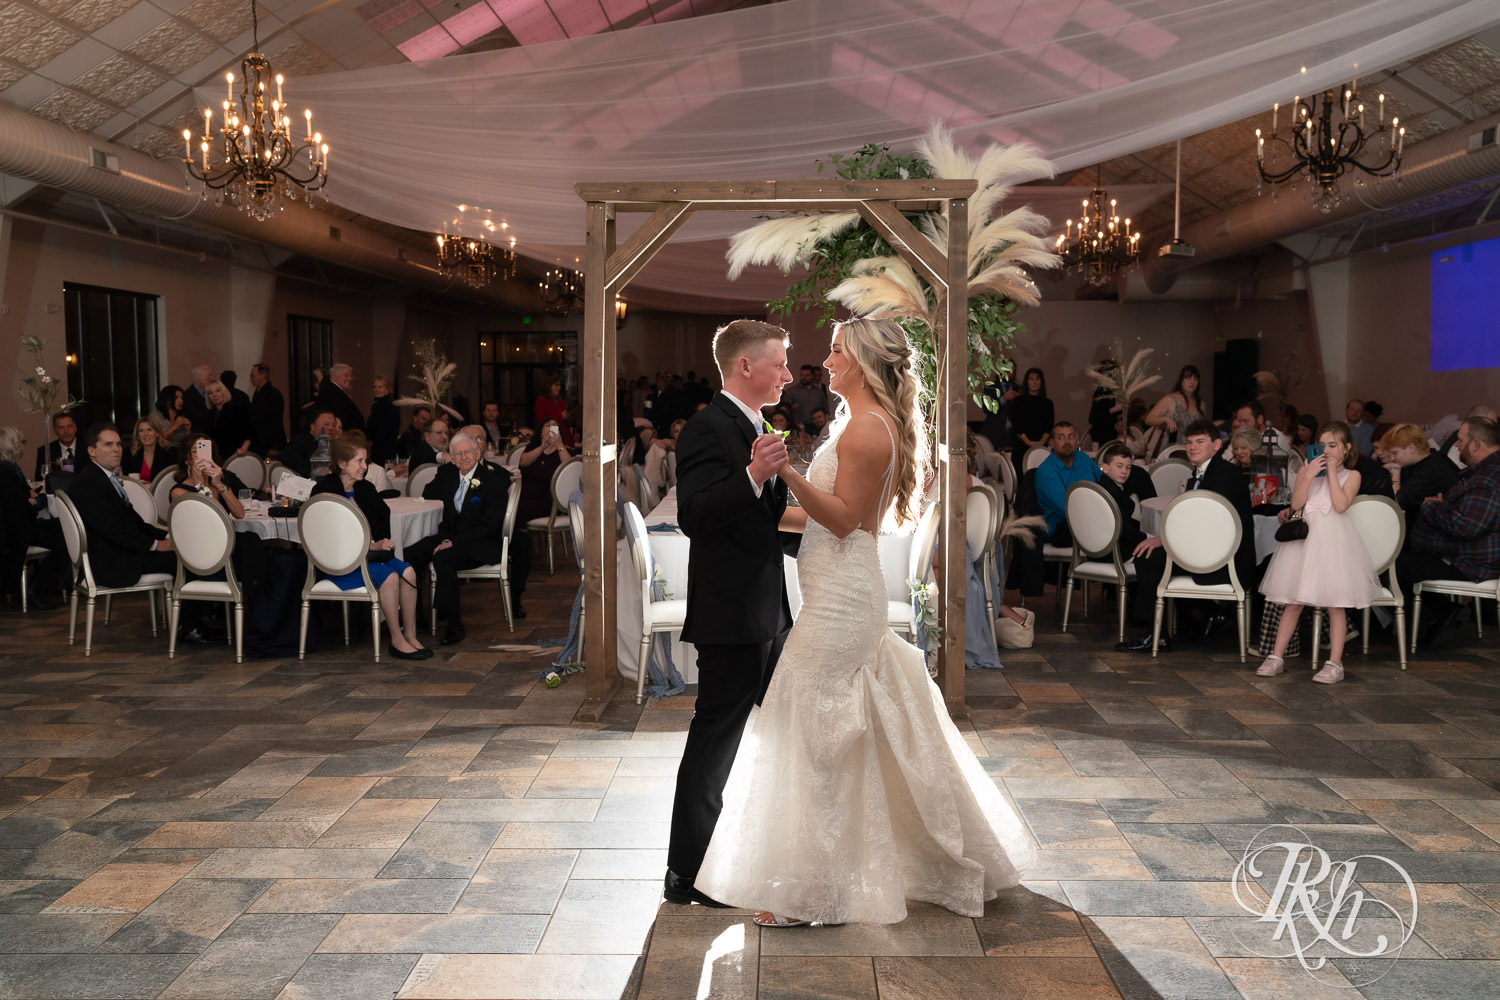 Bride and groom share first dance at wedding reception at Bavaria Downs in Chaska, Minnesota.